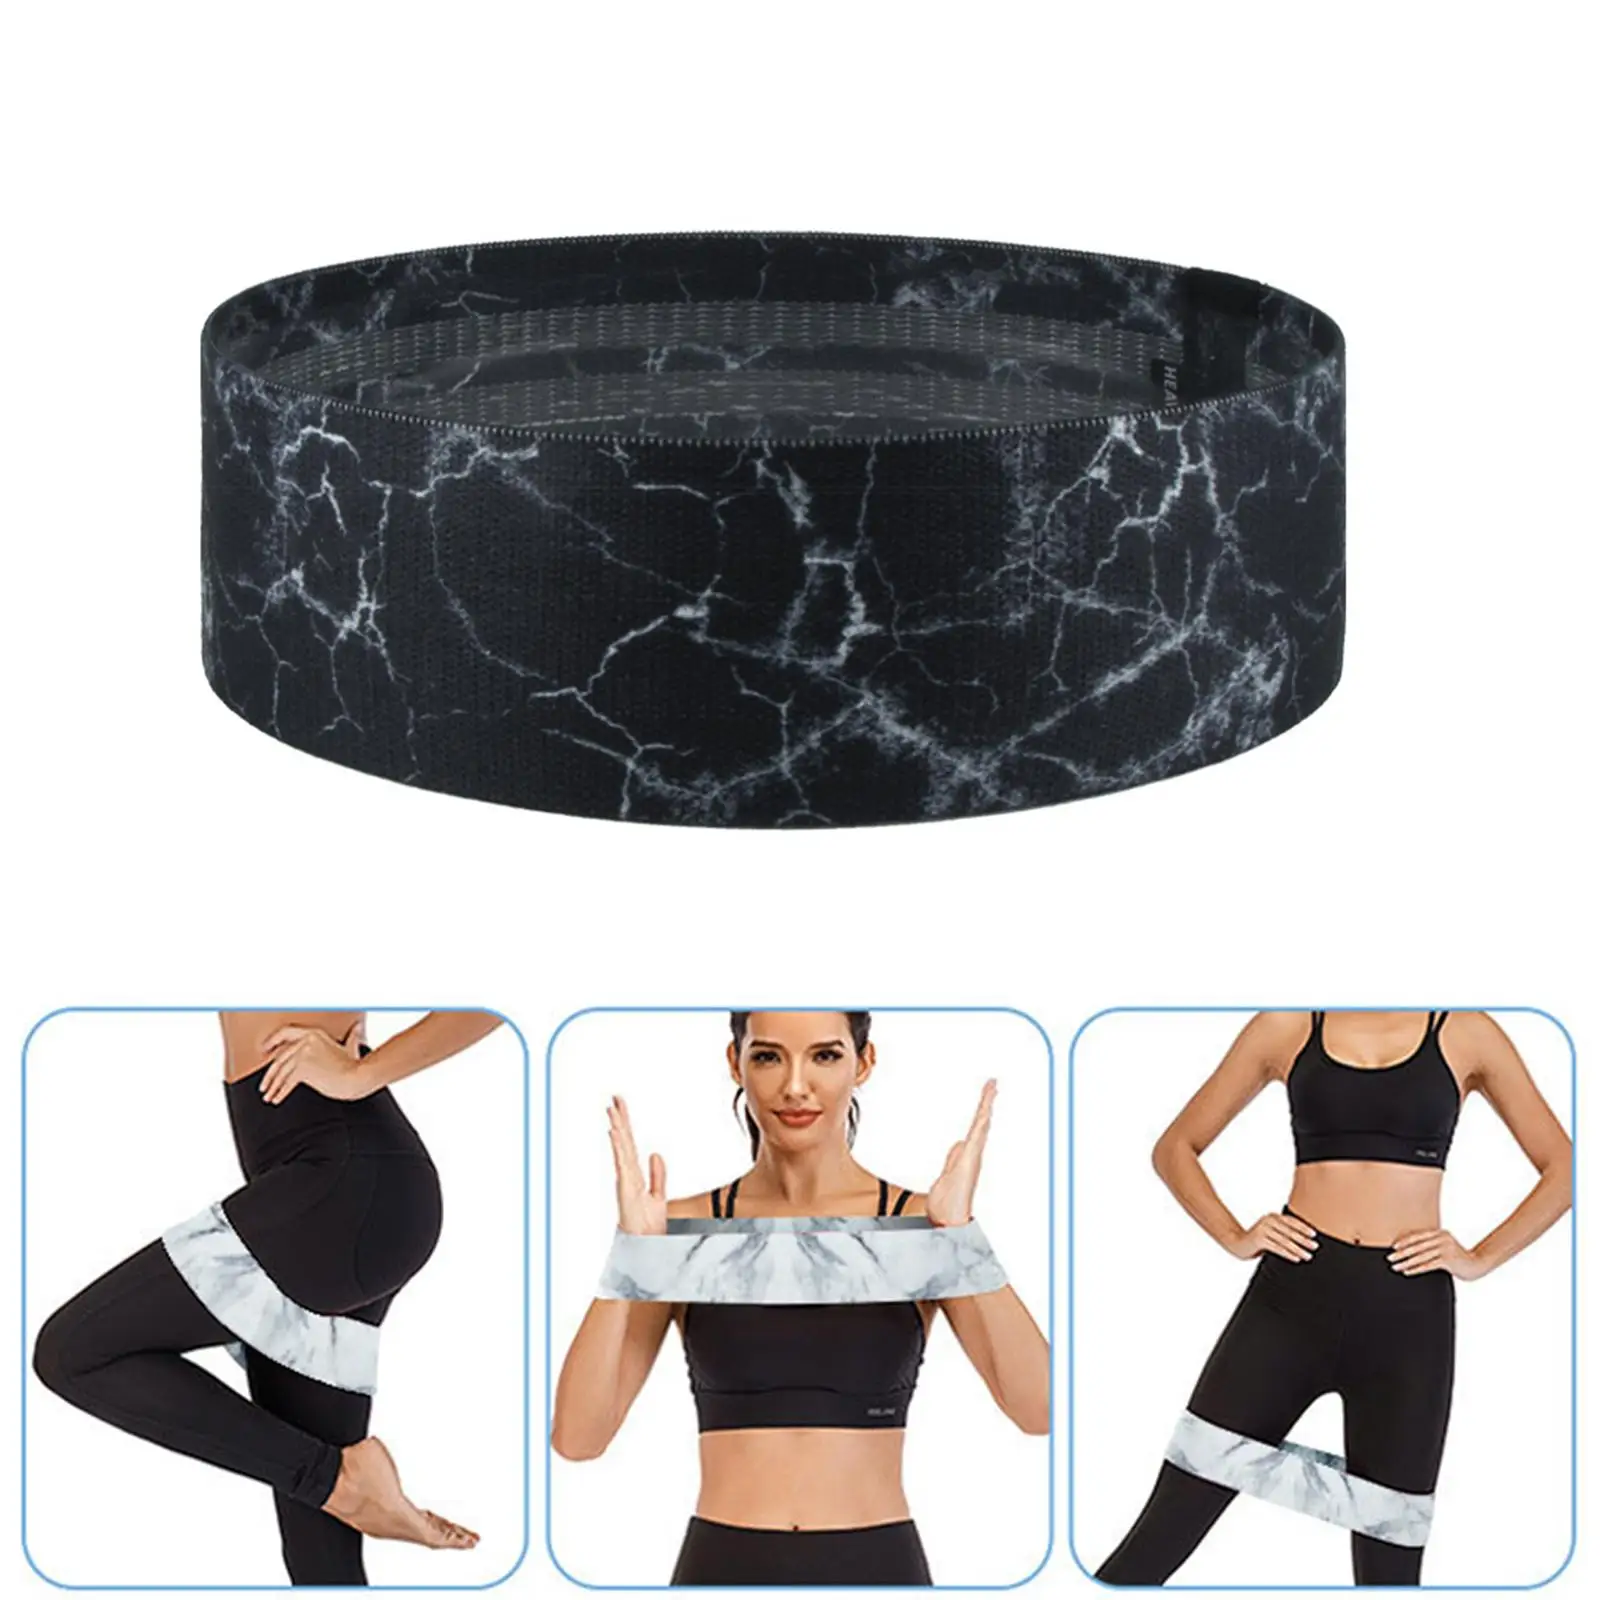 Resistance Bands Exercise Bands Non Slip Squat Bands Elastic Strength Bands for Legs and Butt Exercise Fitness Training Home Gym